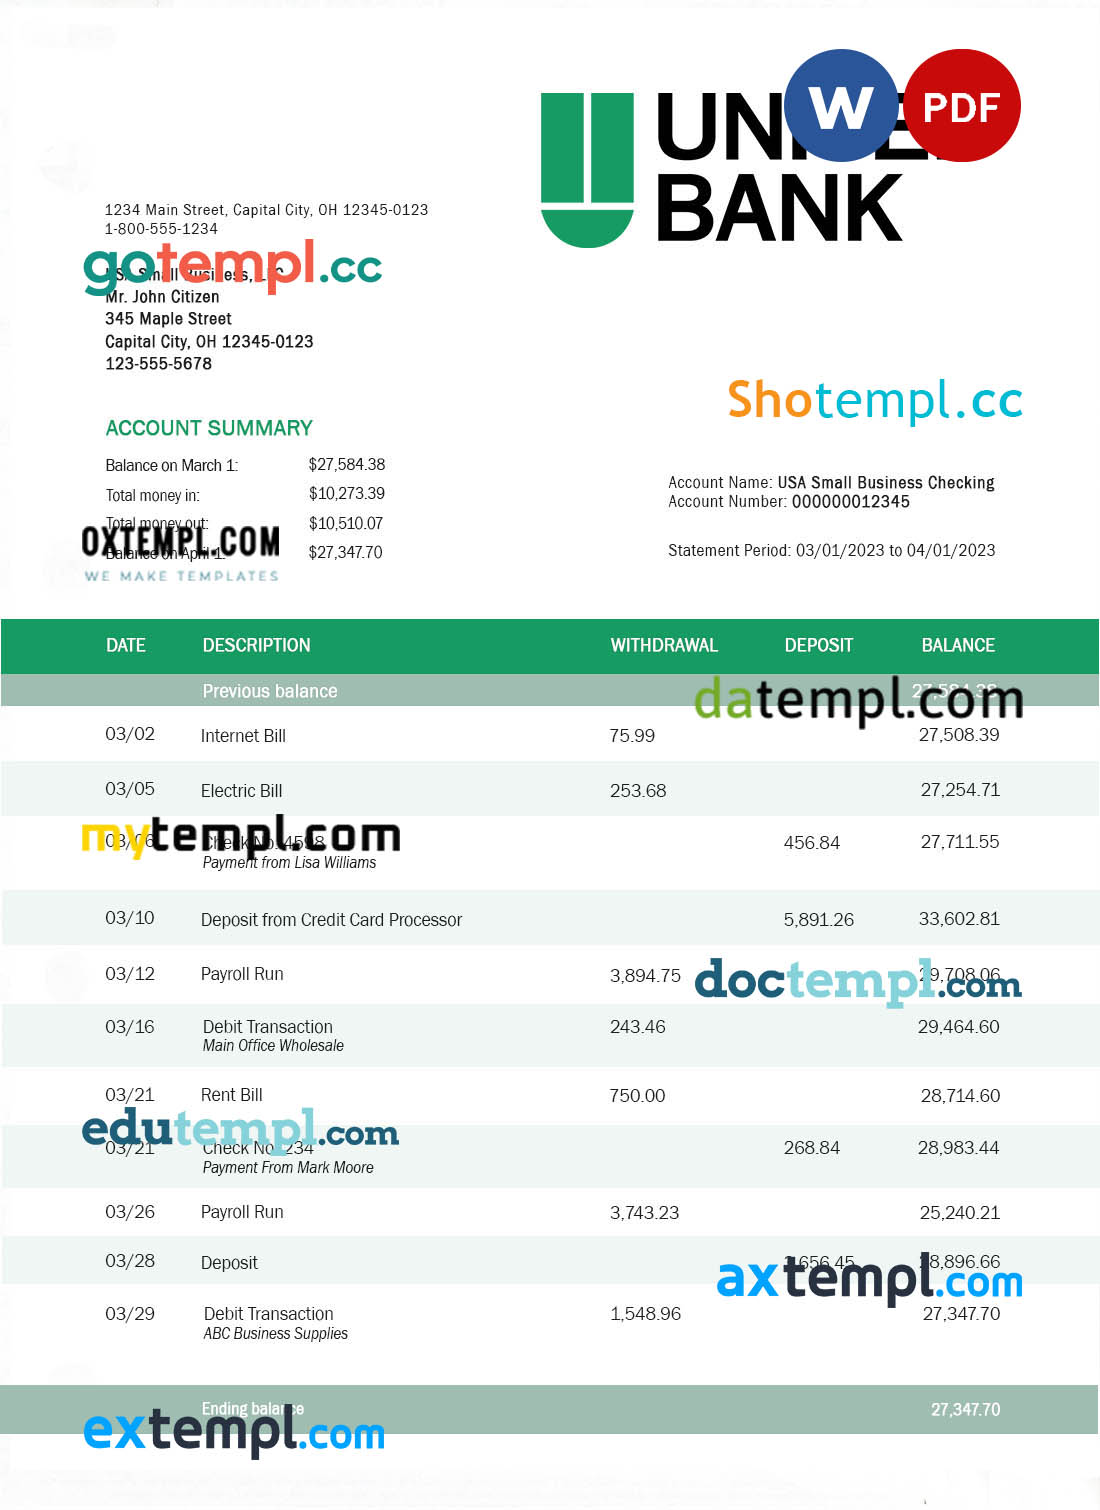 United Bank enterprise account statement Word and PDF template